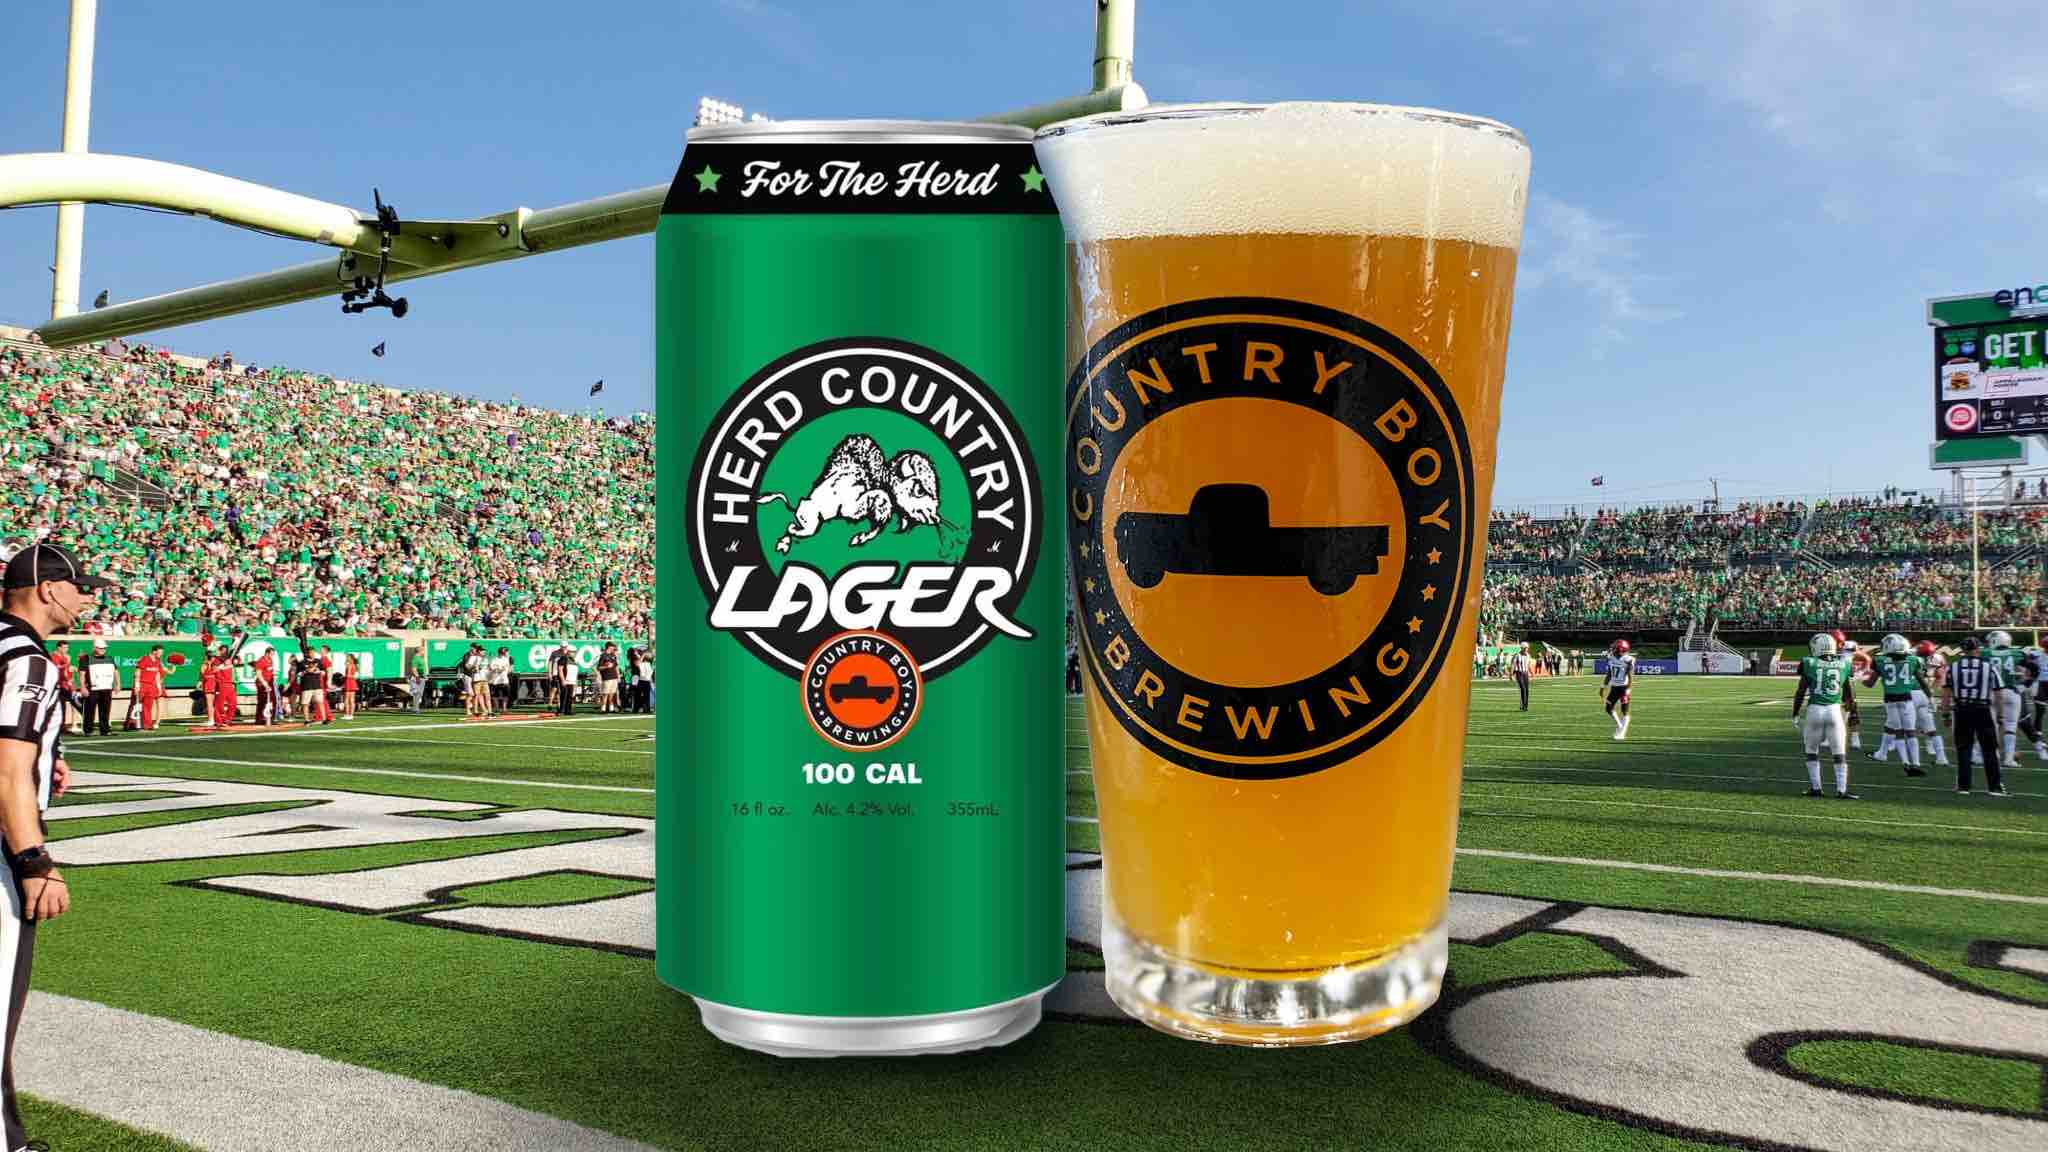 Country Boy “Herd Country Lager” Coming Soon To Huntington Area